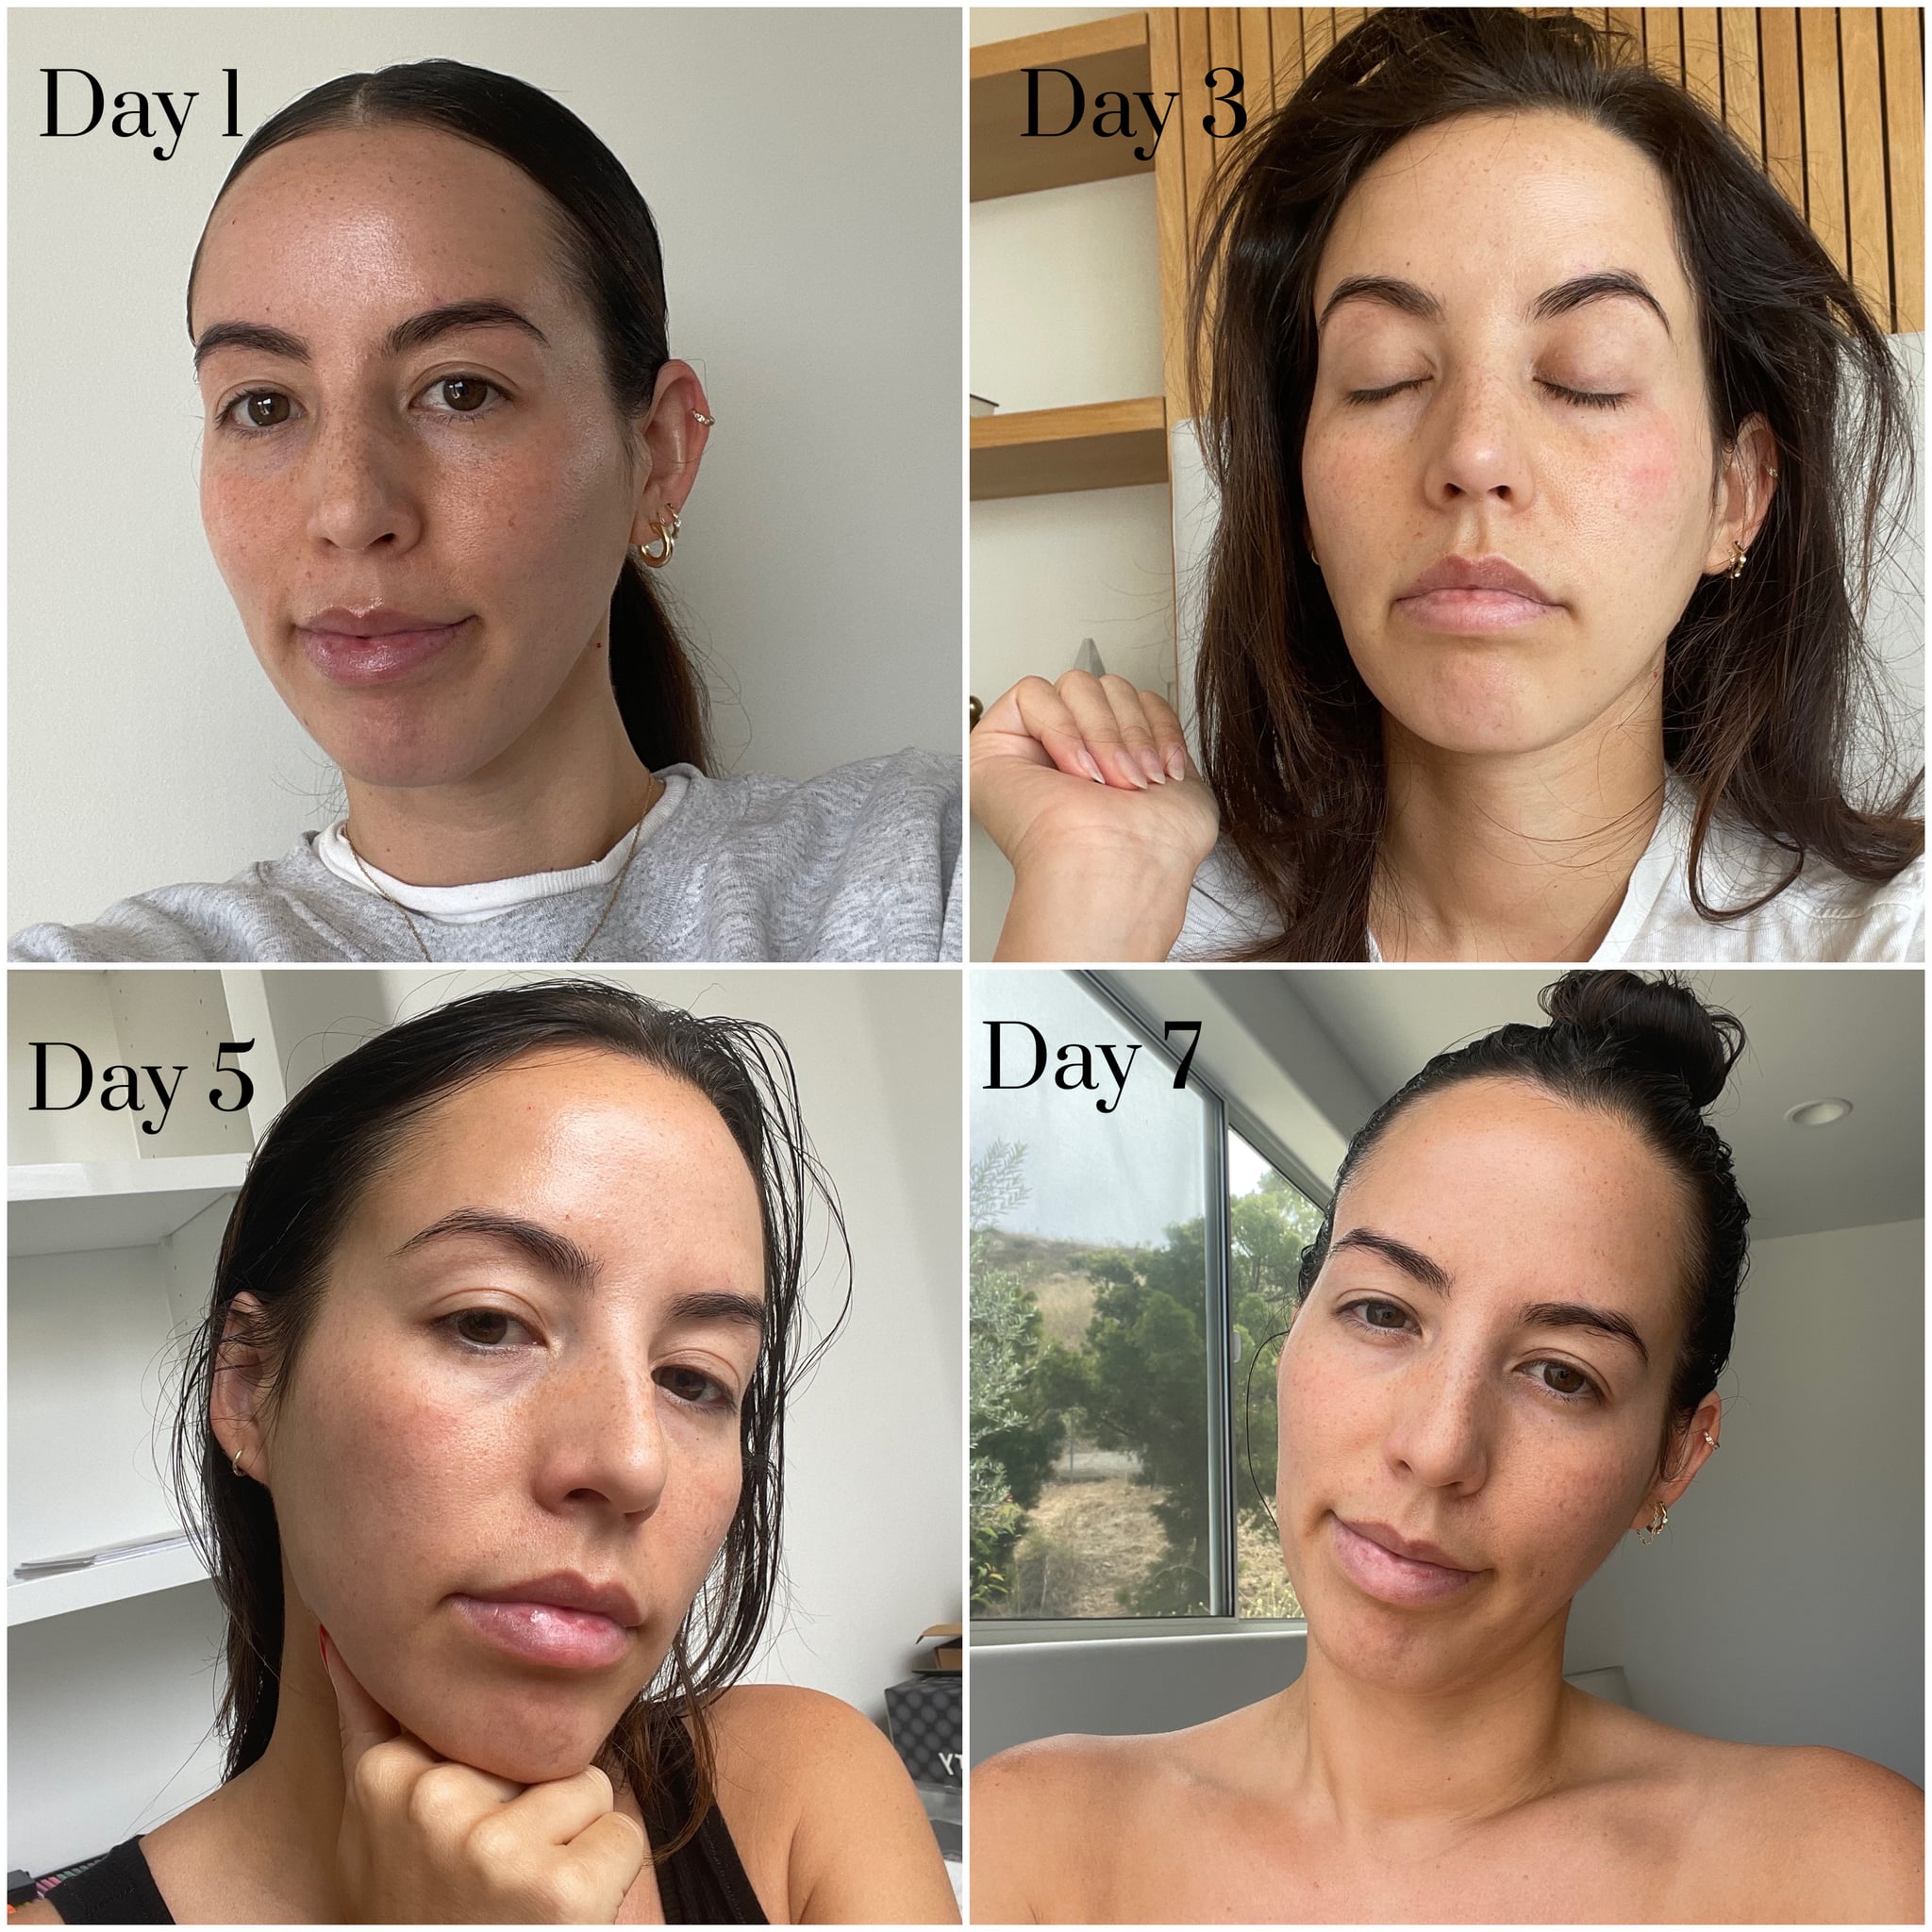 Skin fasting editor experiment